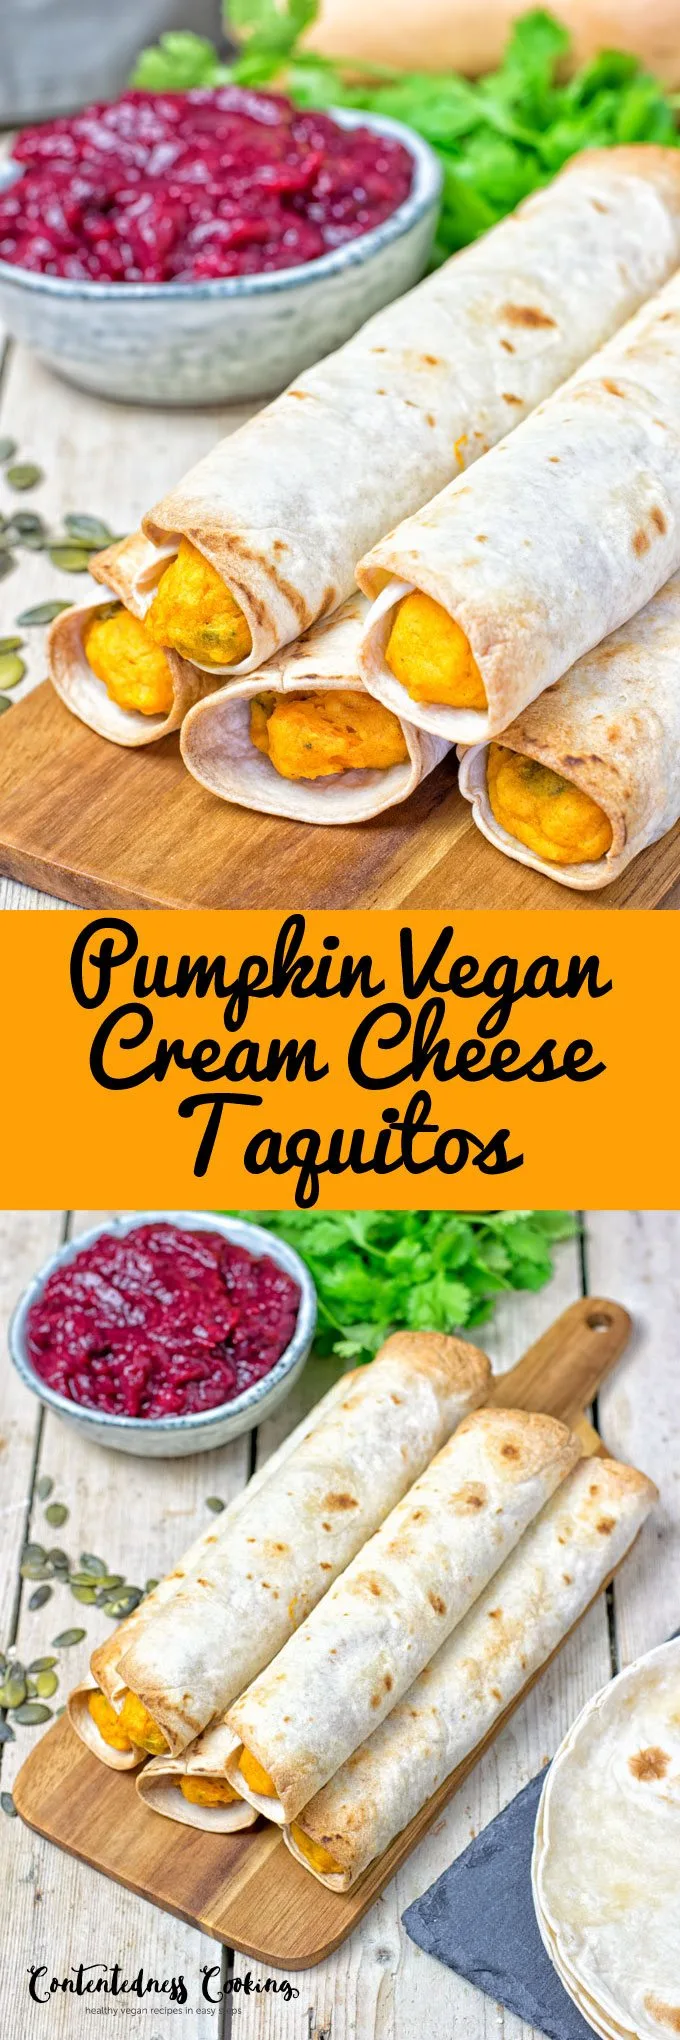 Collage of two pictures of the Pumpkin Vegan Cream Cheese Taquitos